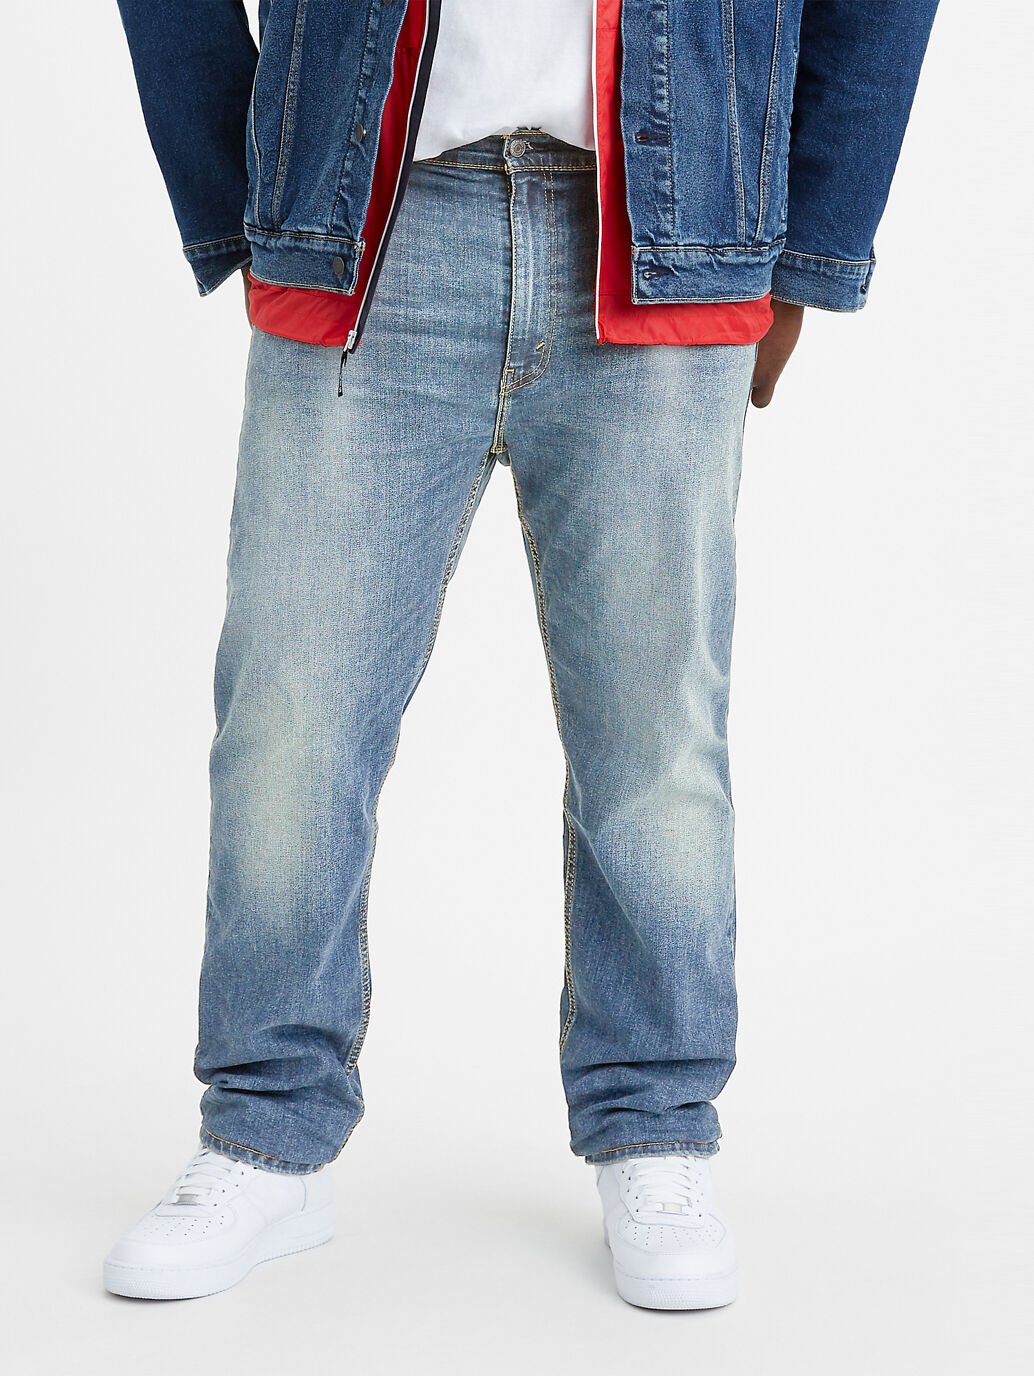 Men's Sale Clothing from Levi's 